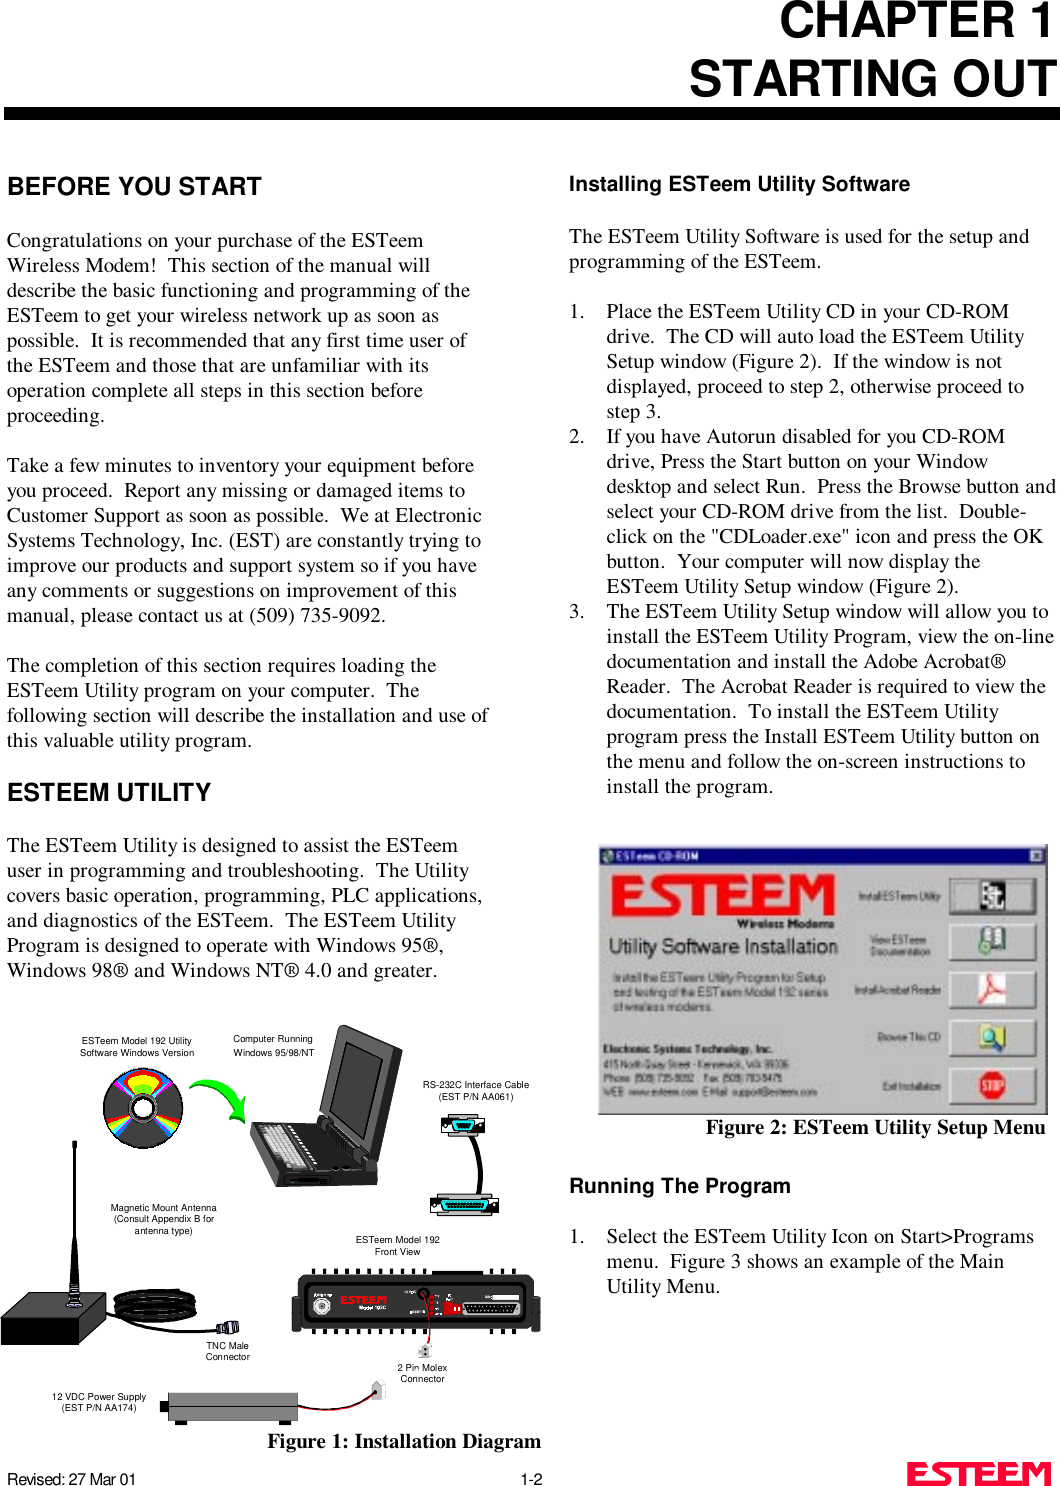 CHAPTER 1STARTING OUTRevised: 27 Mar 01 1-2BEFORE YOU STARTCongratulations on your purchase of the ESTeemWireless Modem!  This section of the manual willdescribe the basic functioning and programming of theESTeem to get your wireless network up as soon aspossible.  It is recommended that any first time user ofthe ESTeem and those that are unfamiliar with itsoperation complete all steps in this section beforeproceeding.Take a few minutes to inventory your equipment beforeyou proceed.  Report any missing or damaged items toCustomer Support as soon as possible.  We at ElectronicSystems Technology, Inc. (EST) are constantly trying toimprove our products and support system so if you haveany comments or suggestions on improvement of thismanual, please contact us at (509) 735-9092.The completion of this section requires loading theESTeem Utility program on your computer.  Thefollowing section will describe the installation and use ofthis valuable utility program.ESTEEM UTILITYThe ESTeem Utility is designed to assist the ESTeemuser in programming and troubleshooting.  The Utilitycovers basic operation, programming, PLC applications,and diagnostics of the ESTeem.  The ESTeem UtilityProgram is designed to operate with Windows 95®,Windows 98® and Windows NT® 4.0 and greater.Installing ESTeem Utility SoftwareThe ESTeem Utility Software is used for the setup andprogramming of the ESTeem. 1. Place the ESTeem Utility CD in your CD-ROMdrive.  The CD will auto load the ESTeem UtilitySetup window (Figure 2).  If the window is notdisplayed, proceed to step 2, otherwise proceed tostep 3.2. If you have Autorun disabled for you CD-ROMdrive, Press the Start button on your Windowdesktop and select Run.  Press the Browse button andselect your CD-ROM drive from the list.  Double-click on the &quot;CDLoader.exe&quot; icon and press the OKbutton.  Your computer will now display theESTeem Utility Setup window (Figure 2).3. The ESTeem Utility Setup window will allow you toinstall the ESTeem Utility Program, view the on-linedocumentation and install the Adobe Acrobat®Reader.  The Acrobat Reader is required to view thedocumentation.  To install the ESTeem Utilityprogram press the Install ESTeem Utility button onthe menu and follow the on-screen instructions toinstall the program.Running The Program1. Select the ESTeem Utility Icon on Start&gt;Programsmenu.  Figure 3 shows an example of the MainUtility Menu.Figure 2: ESTeem Utility Setup MenuRS-232C Interface Cable(EST P/N AA061)12 VDC Power Supply(EST P/N AA174)2 Pin MolexConnectorESTeem Model 192Front ViewESTeem Model 192 UtilitySoftware Windows VersionComputer Running Windows 95/98/NTTNC MaleConnectorMagnetic Mount Antenna(Consult Appendix B forantenna type)Figure 1: Installation Diagram